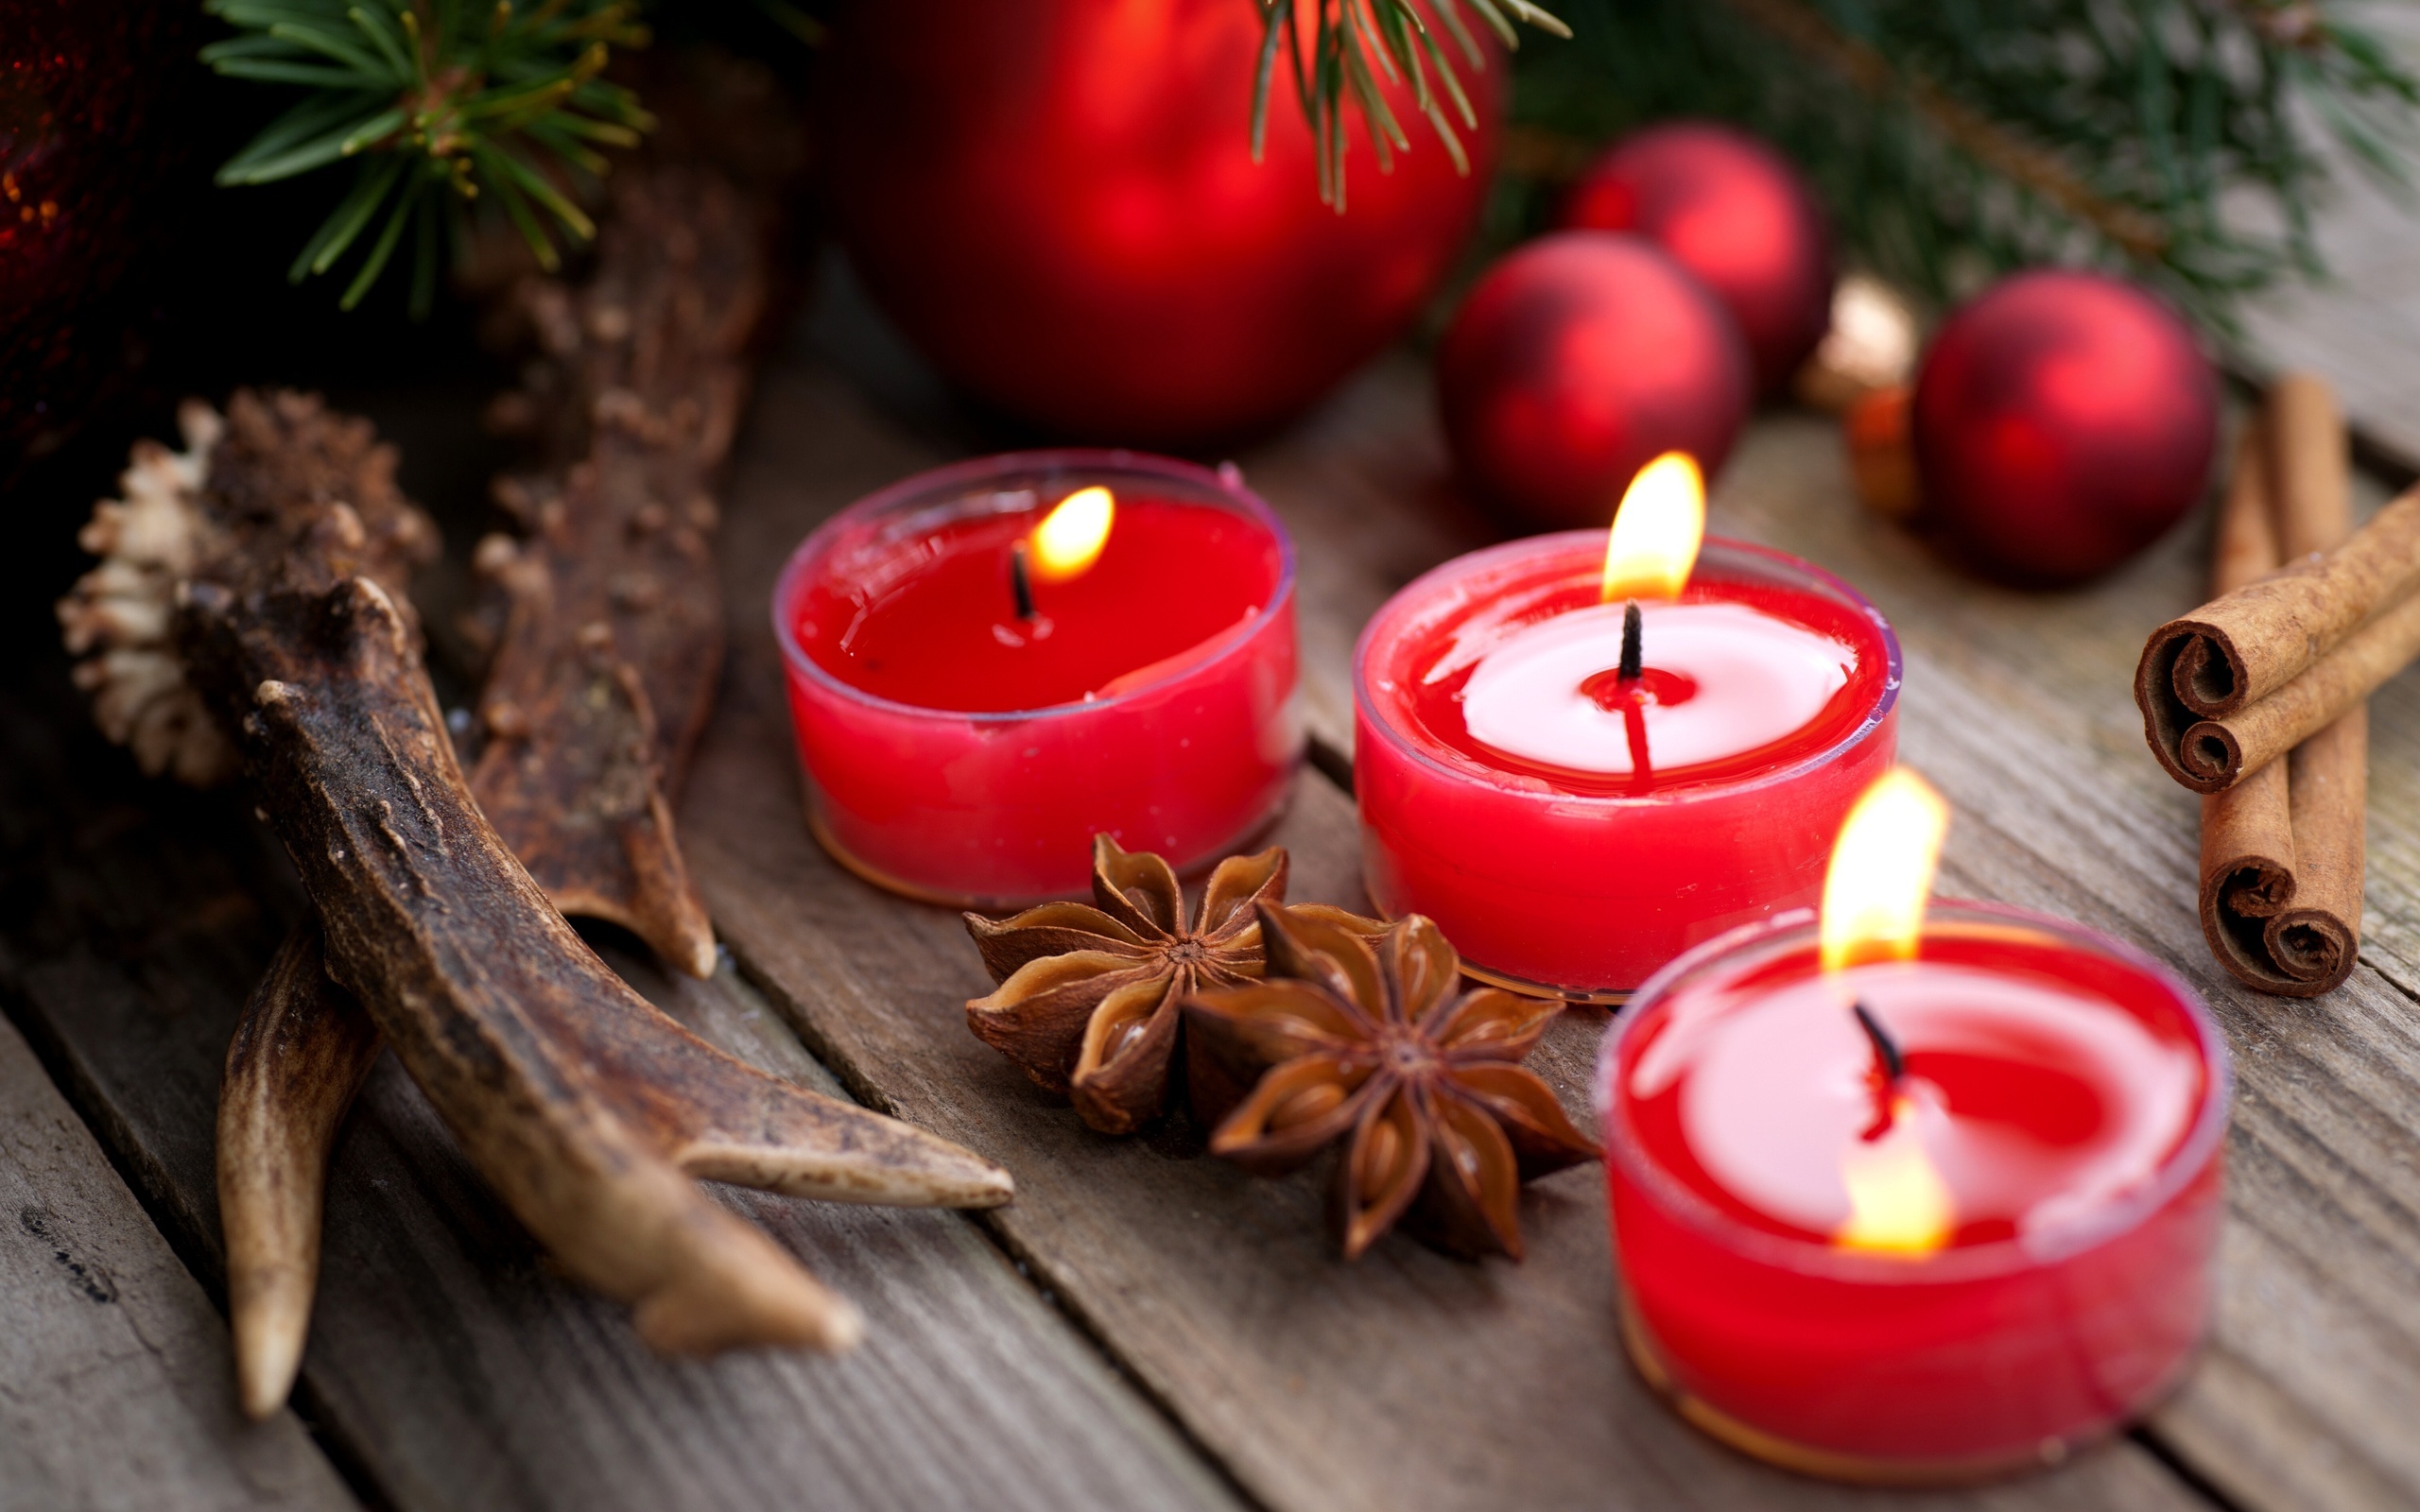 Anise Plant, Aromatic candle setting, Red accents, Warm ambiance, 2560x1600 HD Desktop